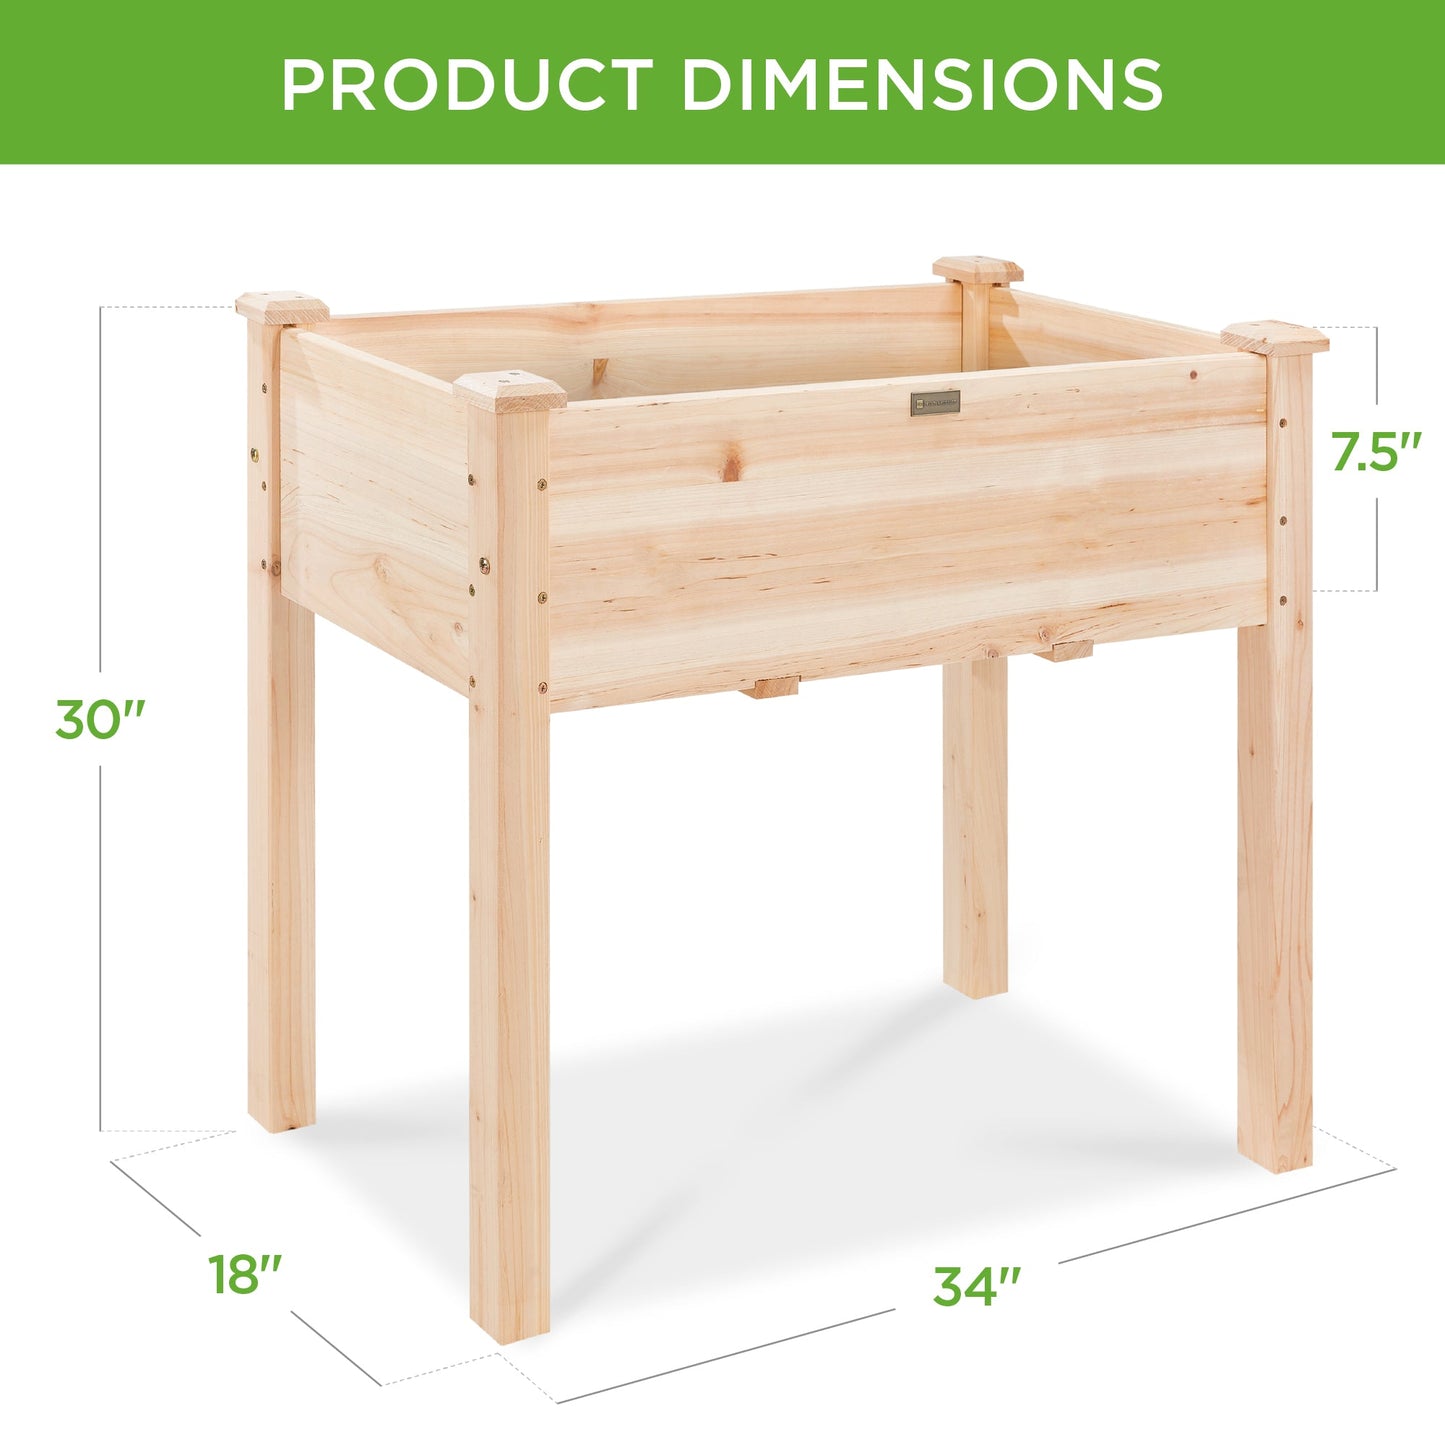 Raised Garden Bed, Elevated Wood Planter Box Stand w/ Bed Liner - 34x18x30in